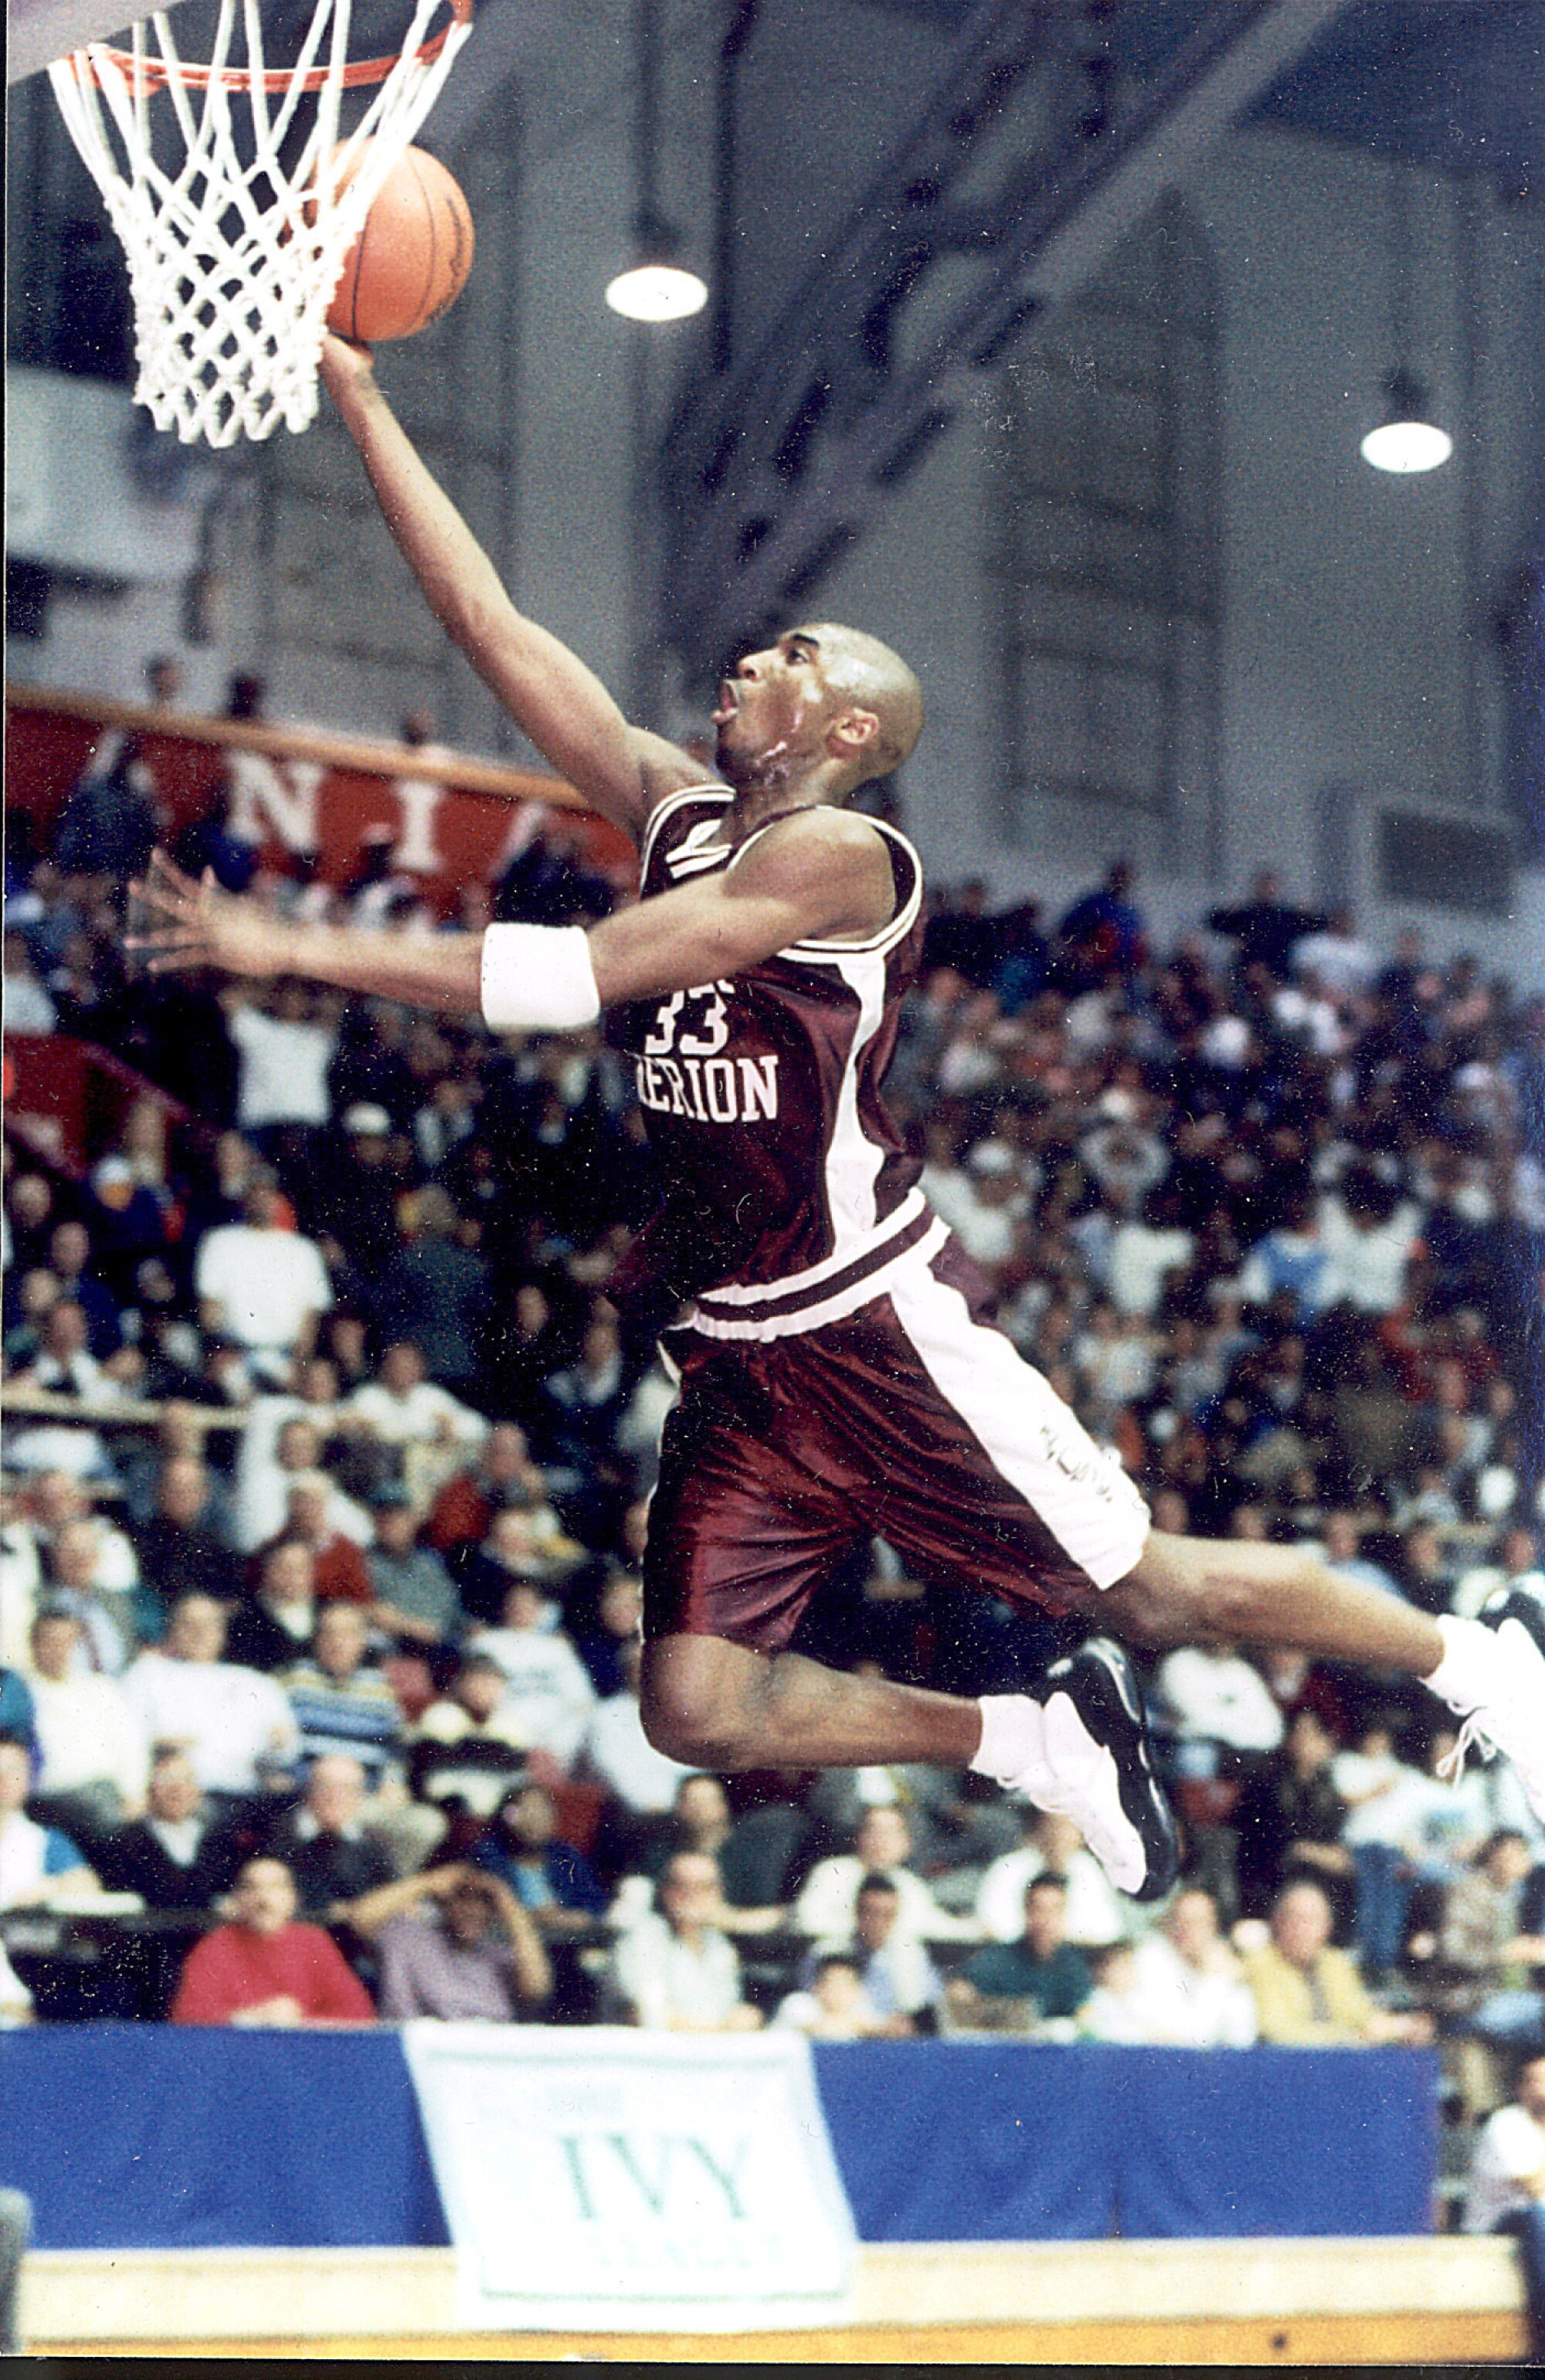 Kobe Bryant elevates for a dunk during a Lower Merion playoff game.